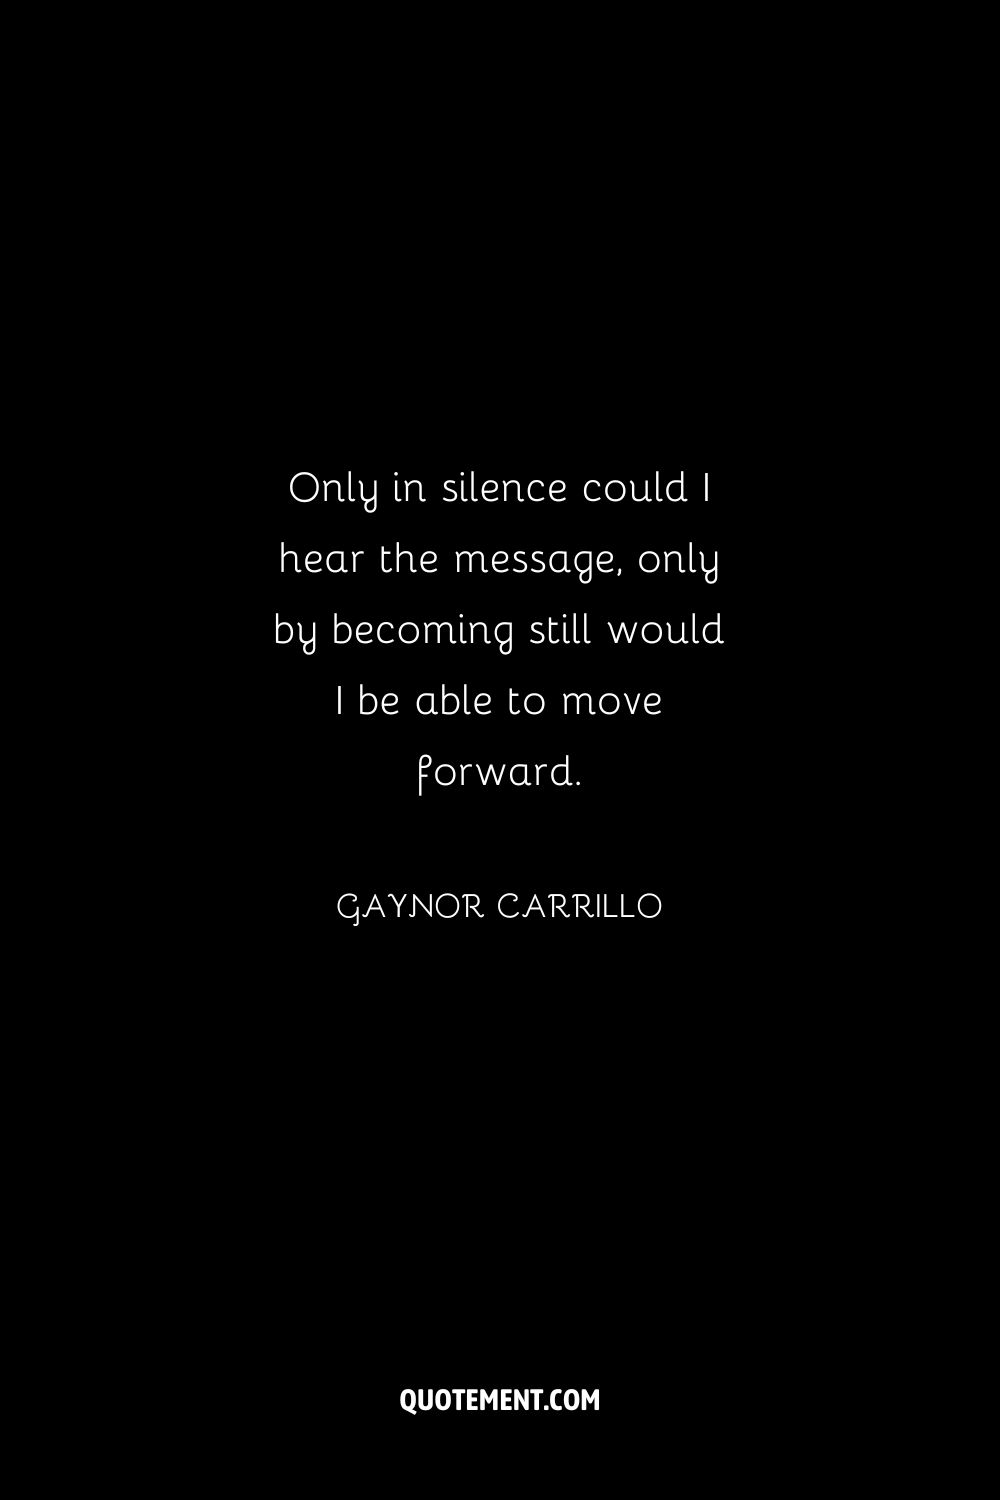 Only in silence could I hear the message, only by becoming still would I be able to move forward